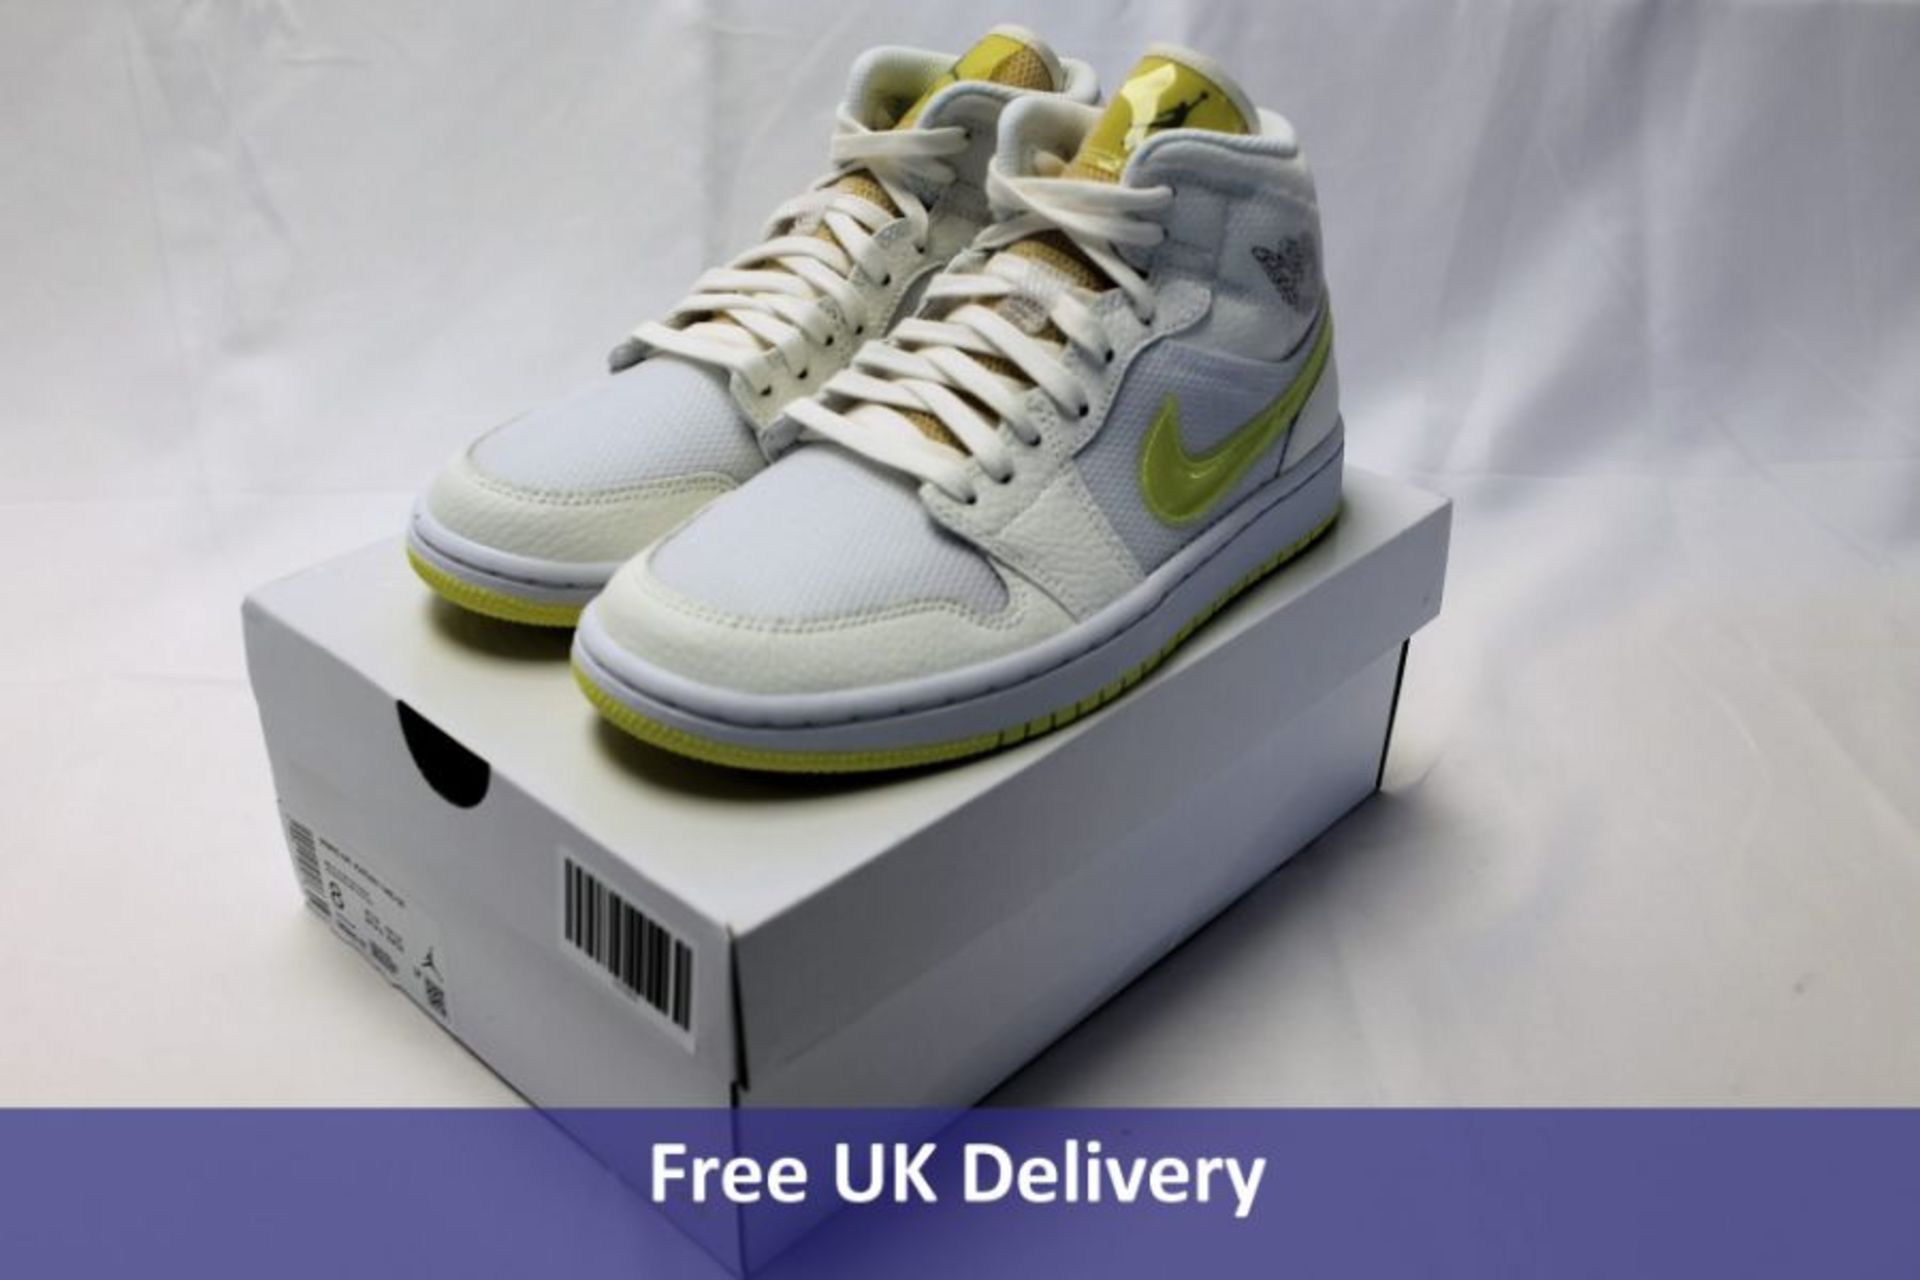 Nike Women's Air Jordans 1 Mid SE Trainers in White, UK Size 5.5